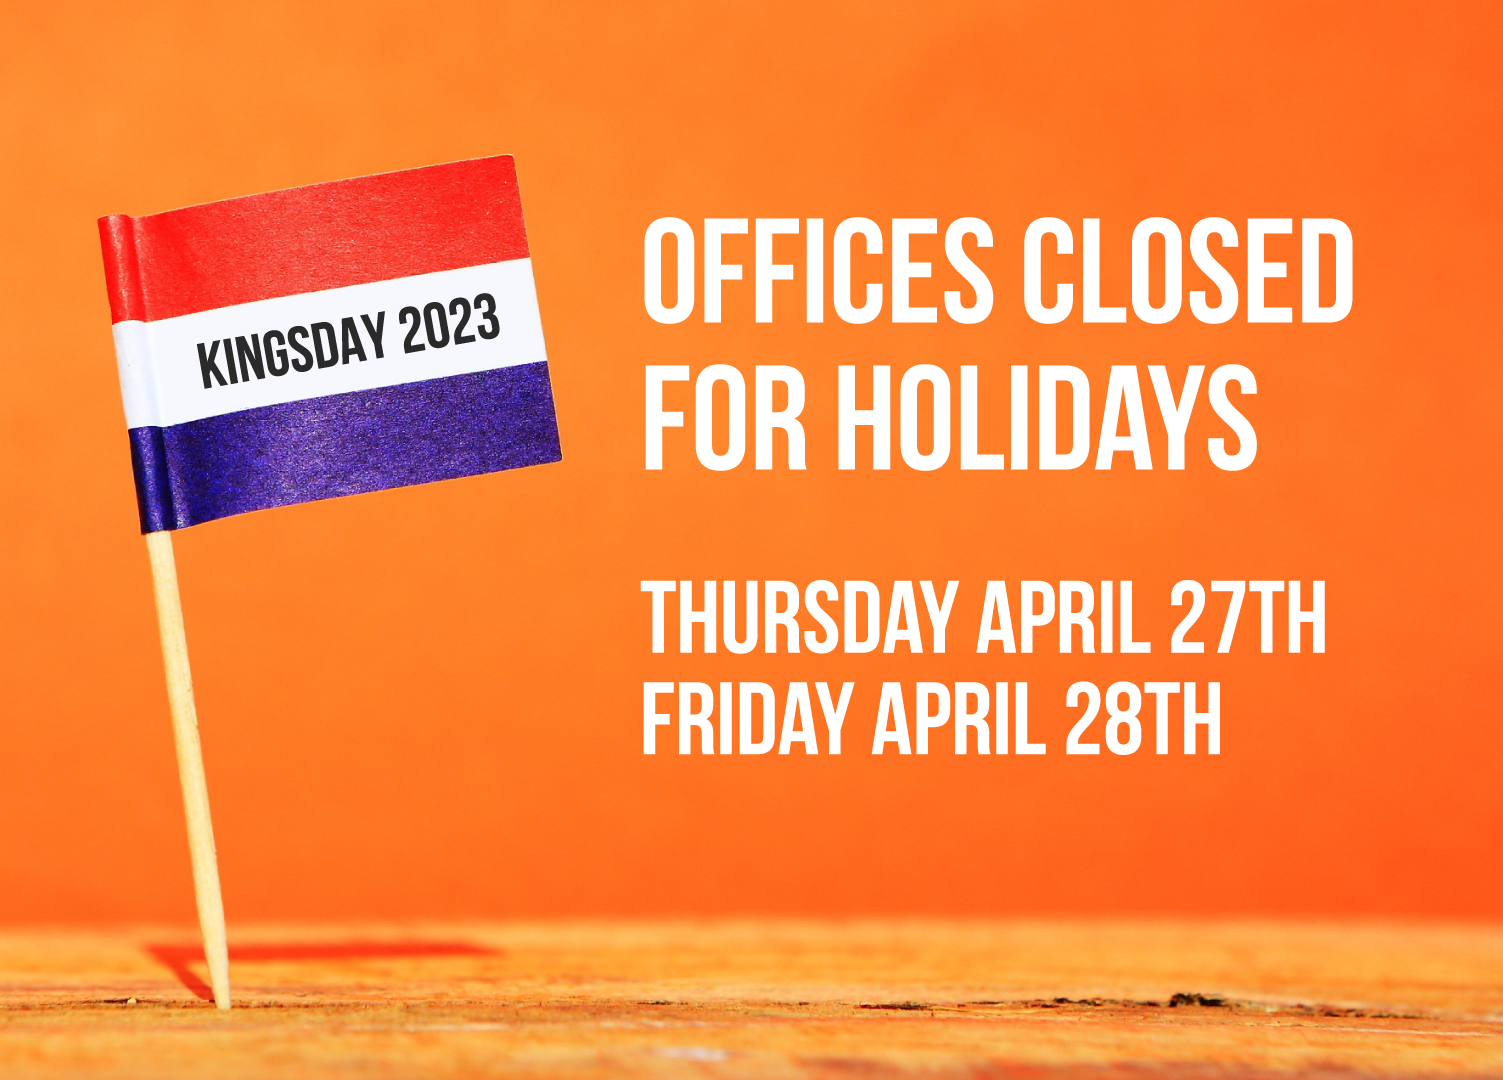 Offices Closed for Holidays!